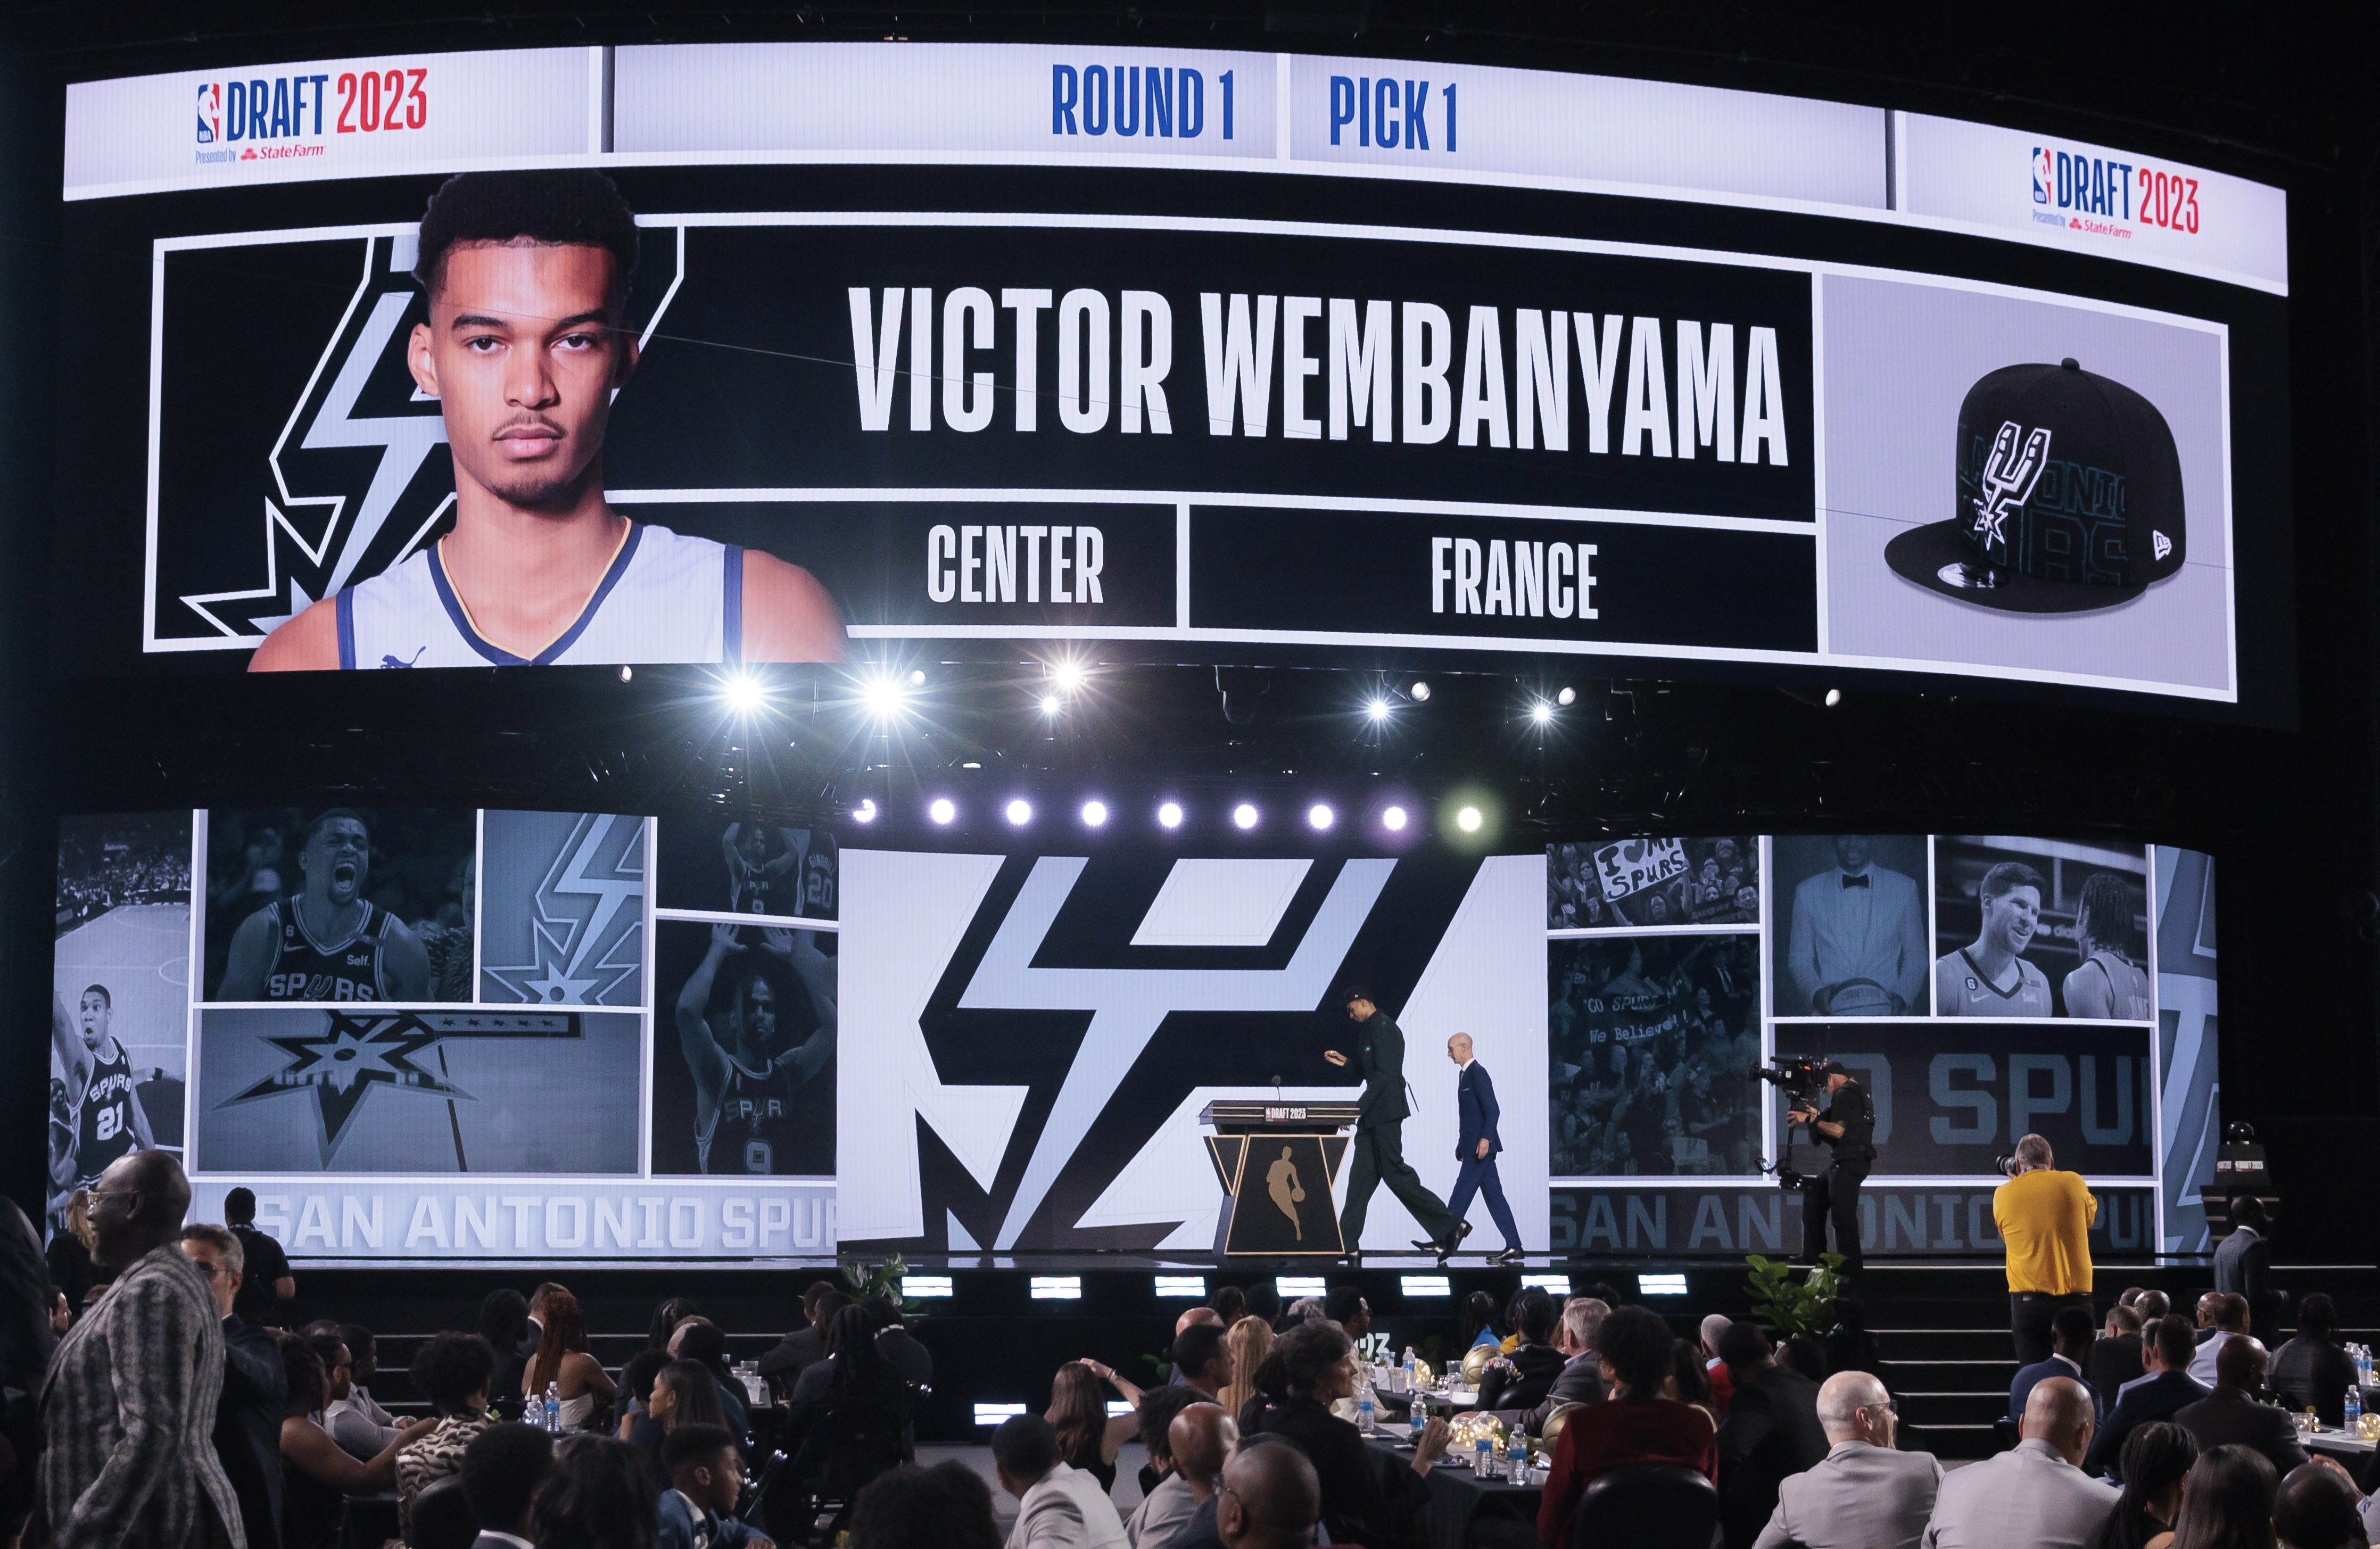 🔥 VICTOR WEMBANYAMA PICKED FIRST OVERALL IN NBA DRAFT BY SAN ANTONIO SPURS